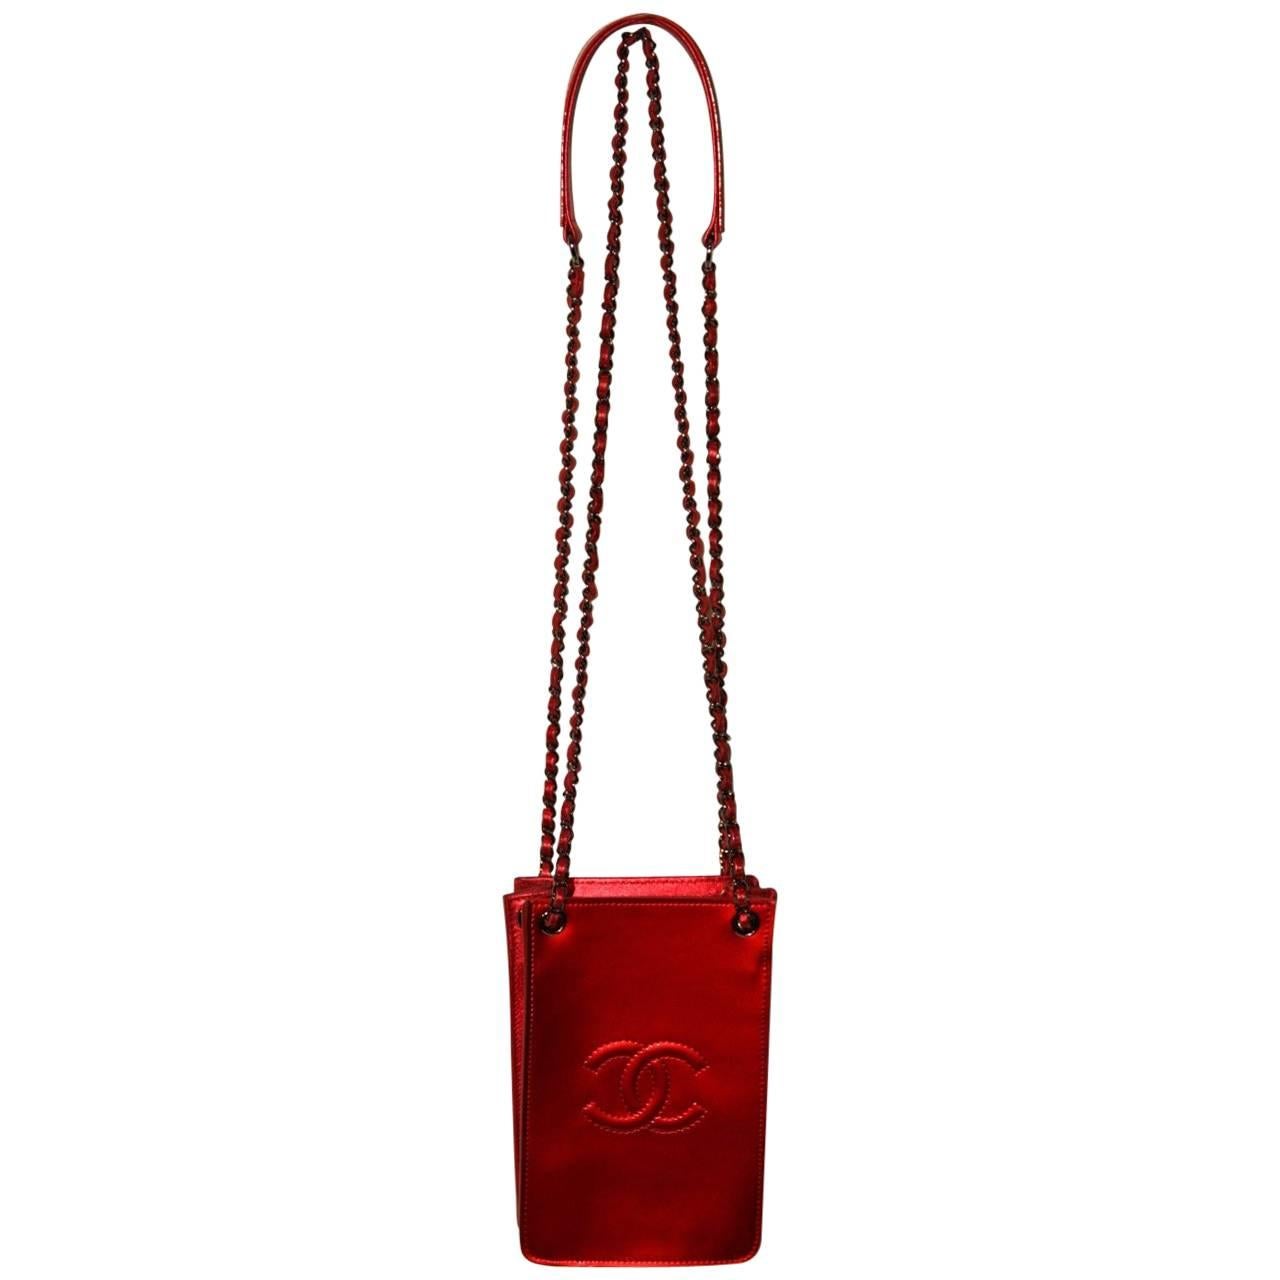 CHANEL Red Metallic Patent Leather Smartphone Bag 